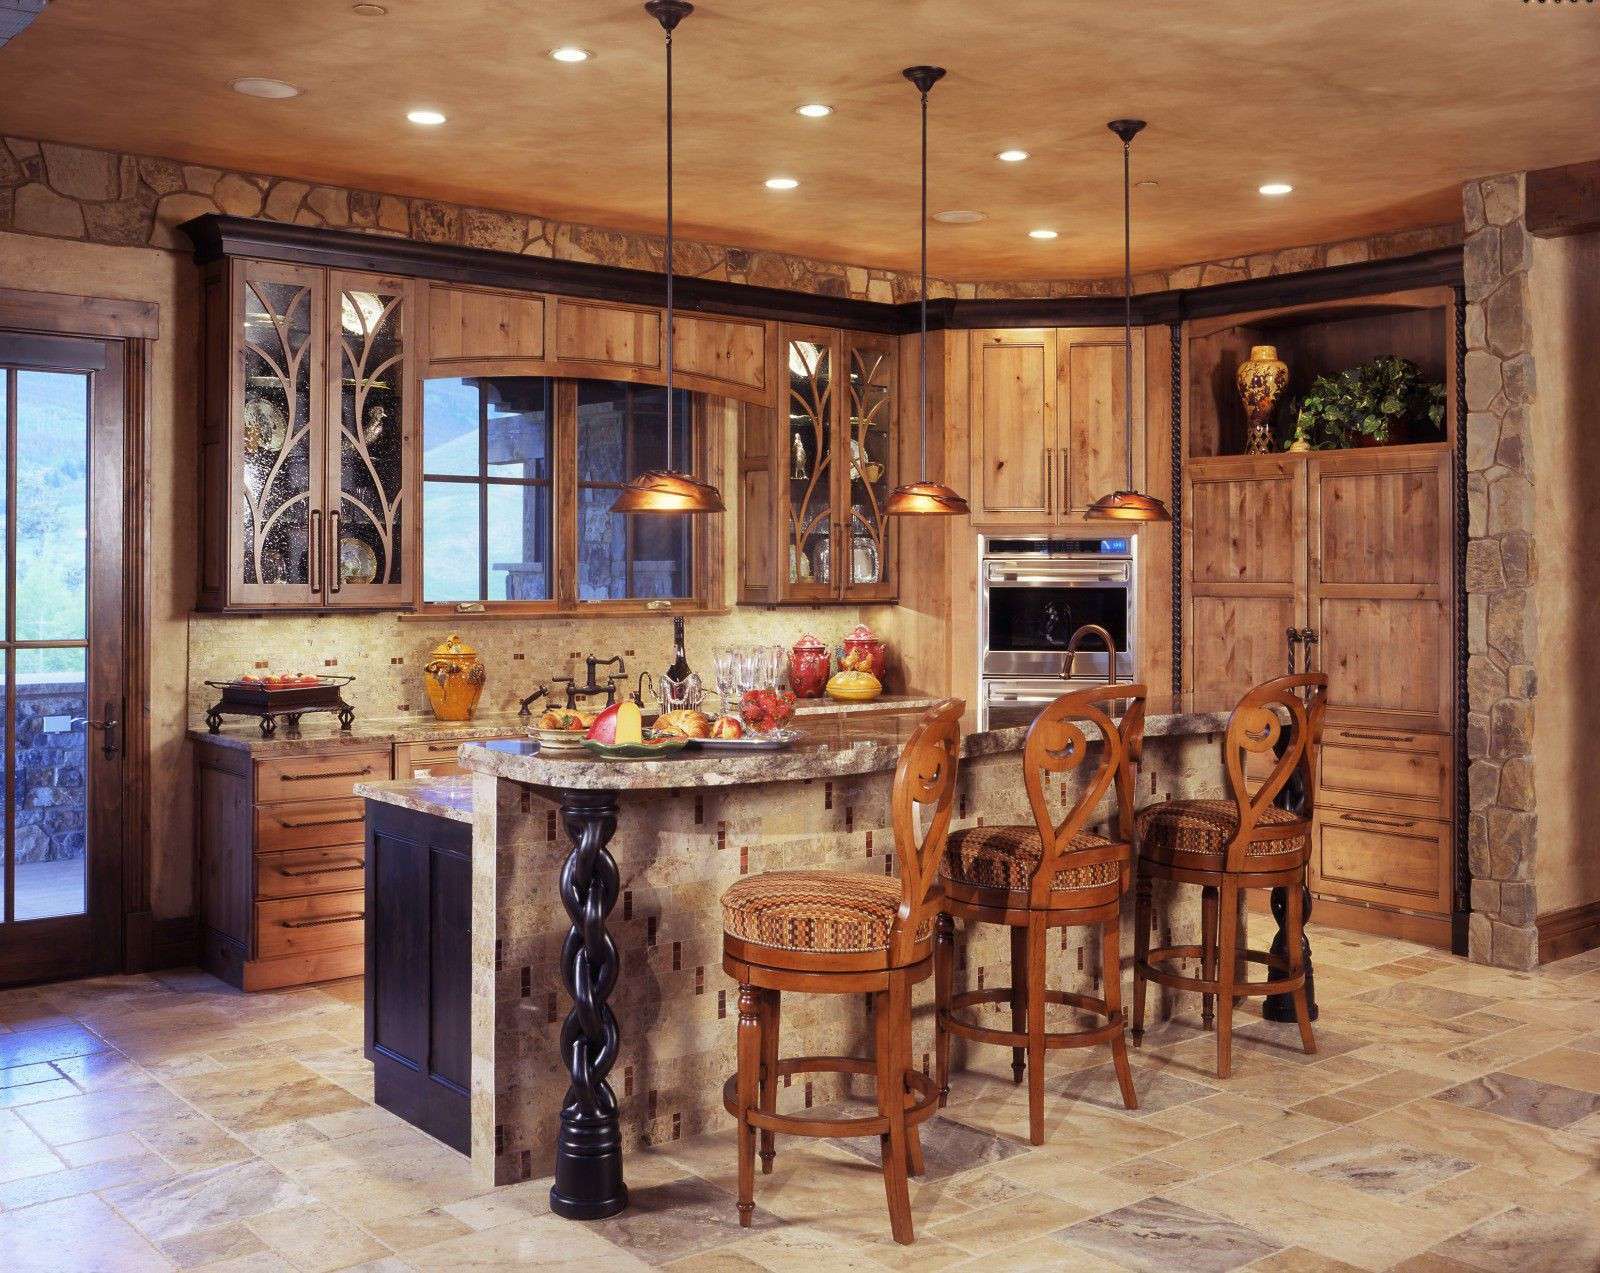 This rustic farmhouse kitchen idea carries more of an English design. Doing a photo finish on the ceiling with lighting over the island countertop with seating is a great idea.